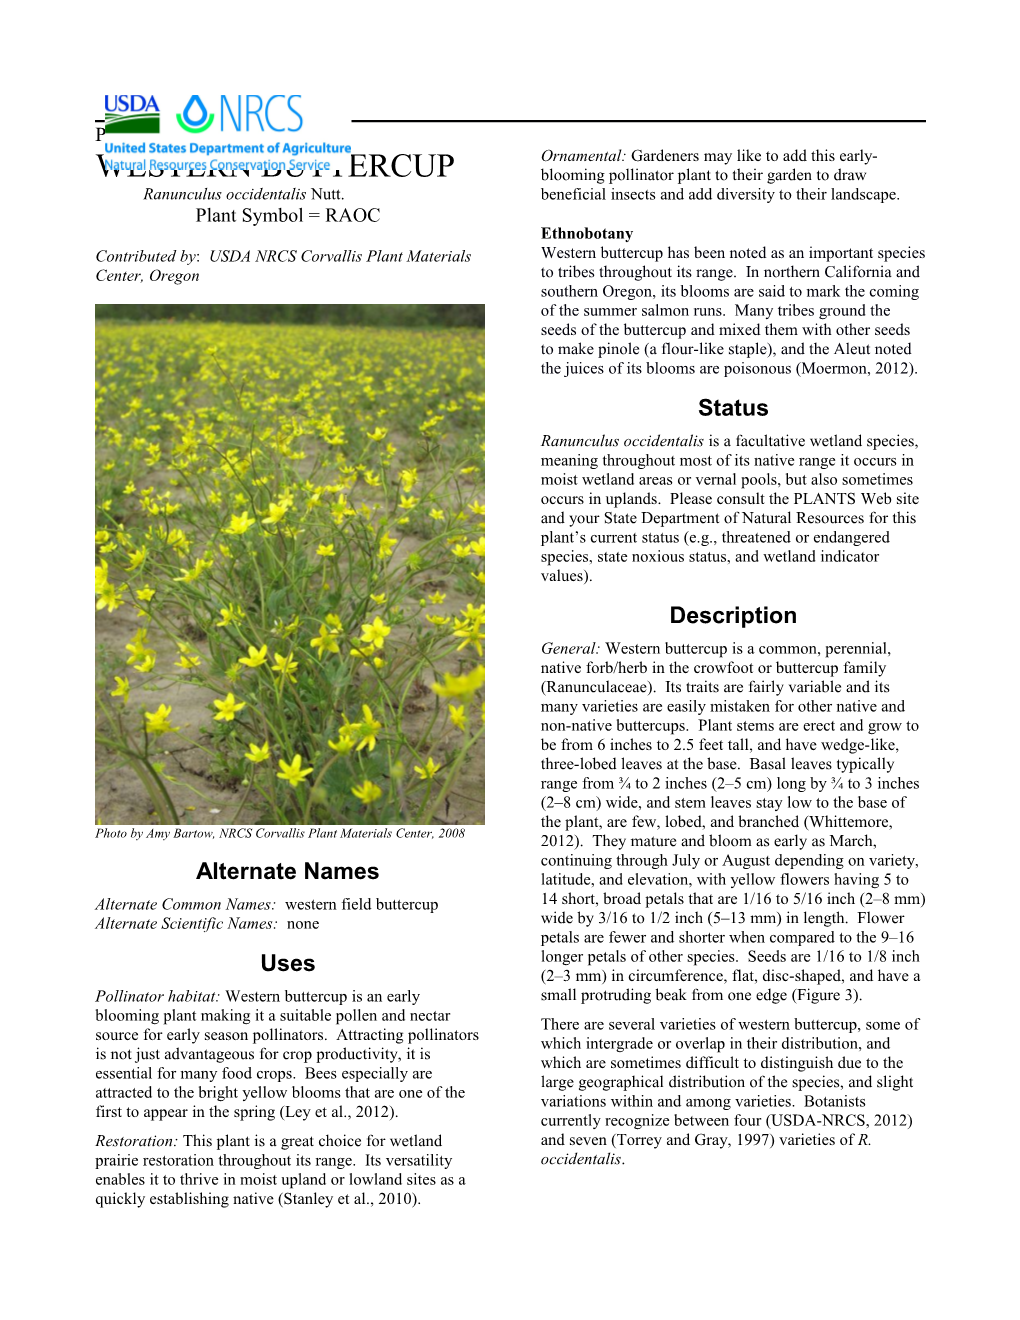 Western Buttercup (Ranunculus Occidentalis) Plant Guide